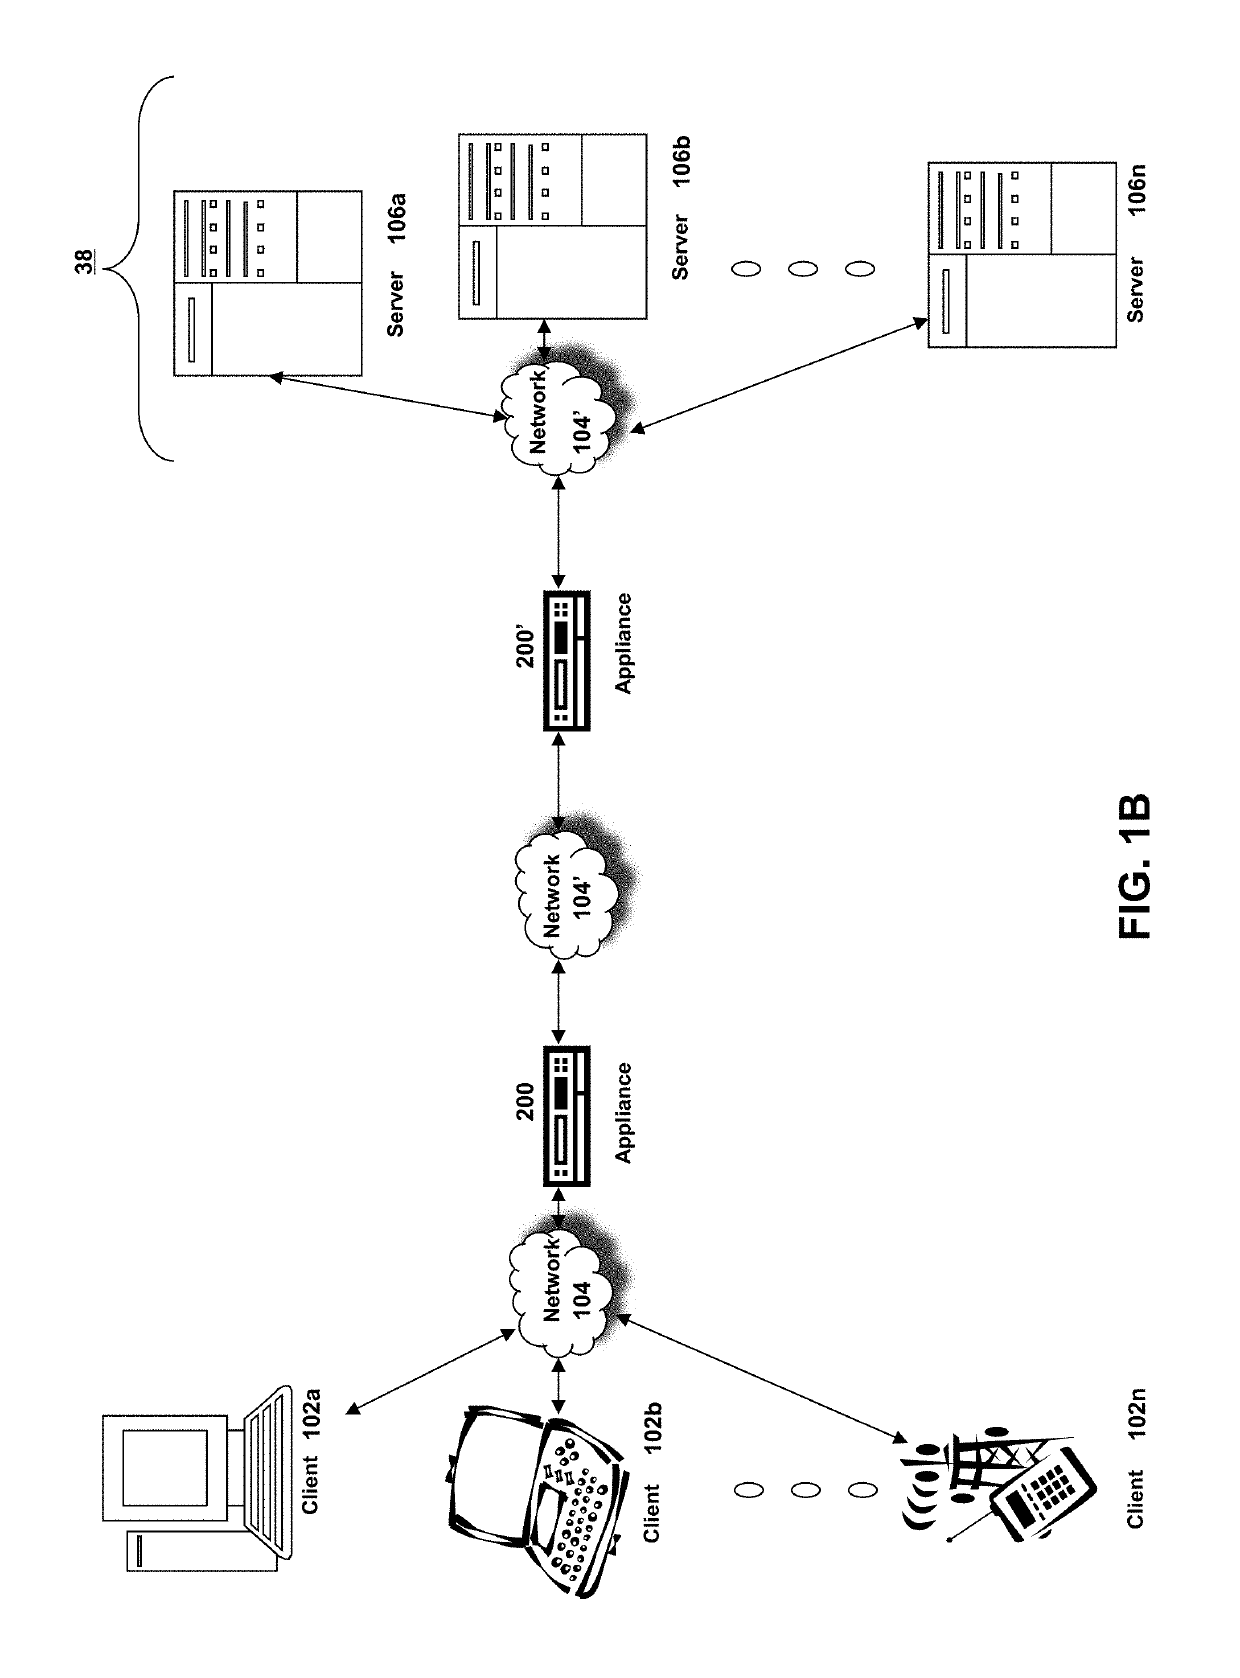 Systems and methods for provisioning network automation by logically separating L2-L3 entities from L4-L7 entities using a software defined network (SDN) controller